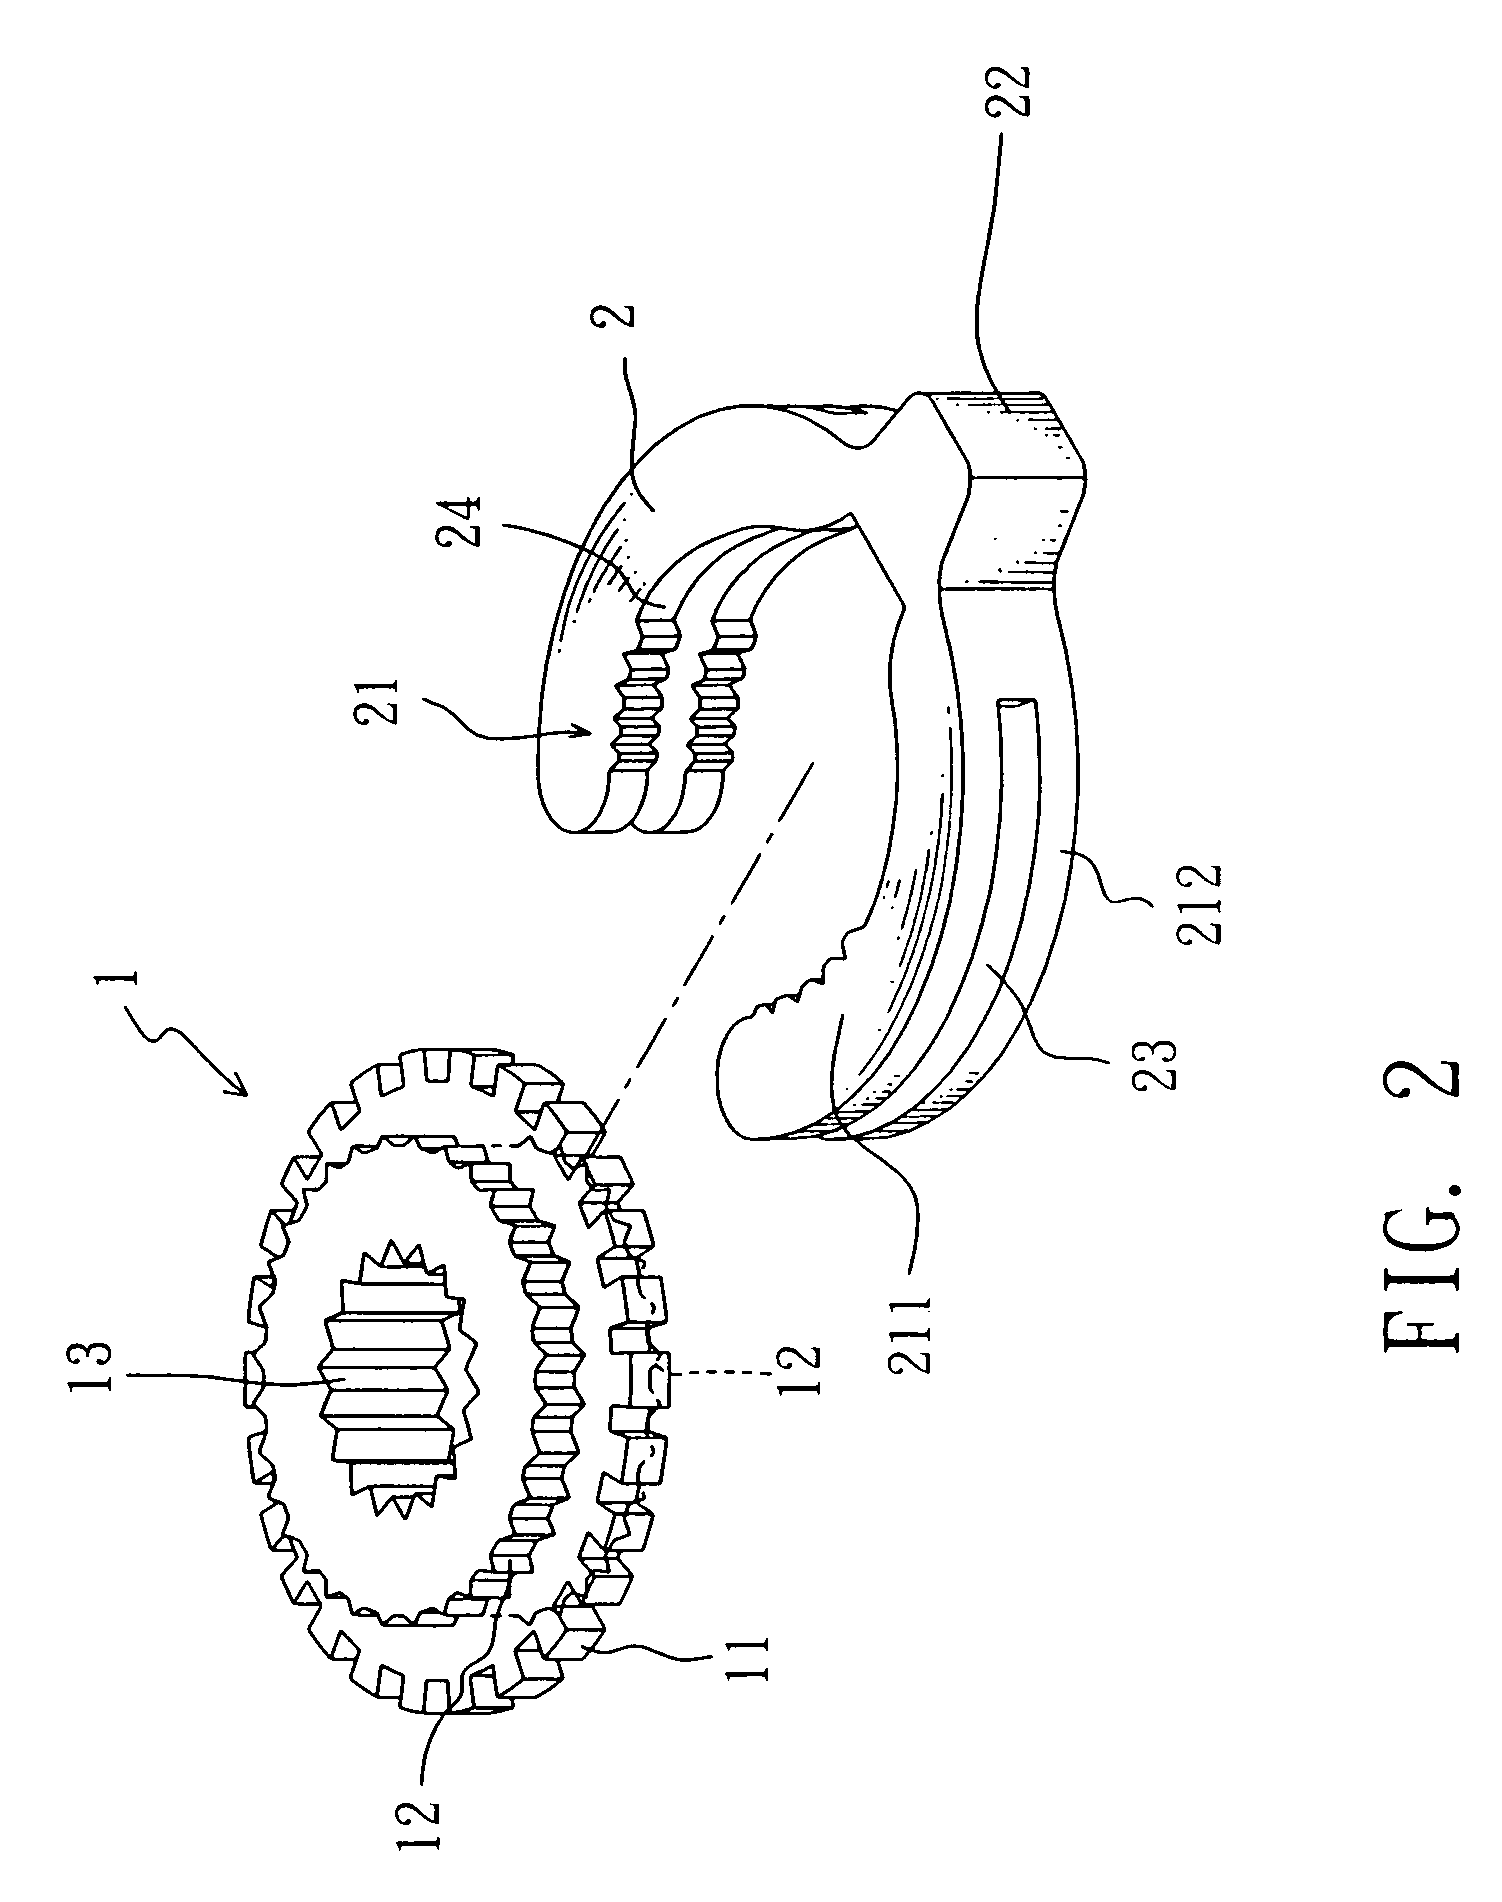 Gas flowrate control device for gas burner